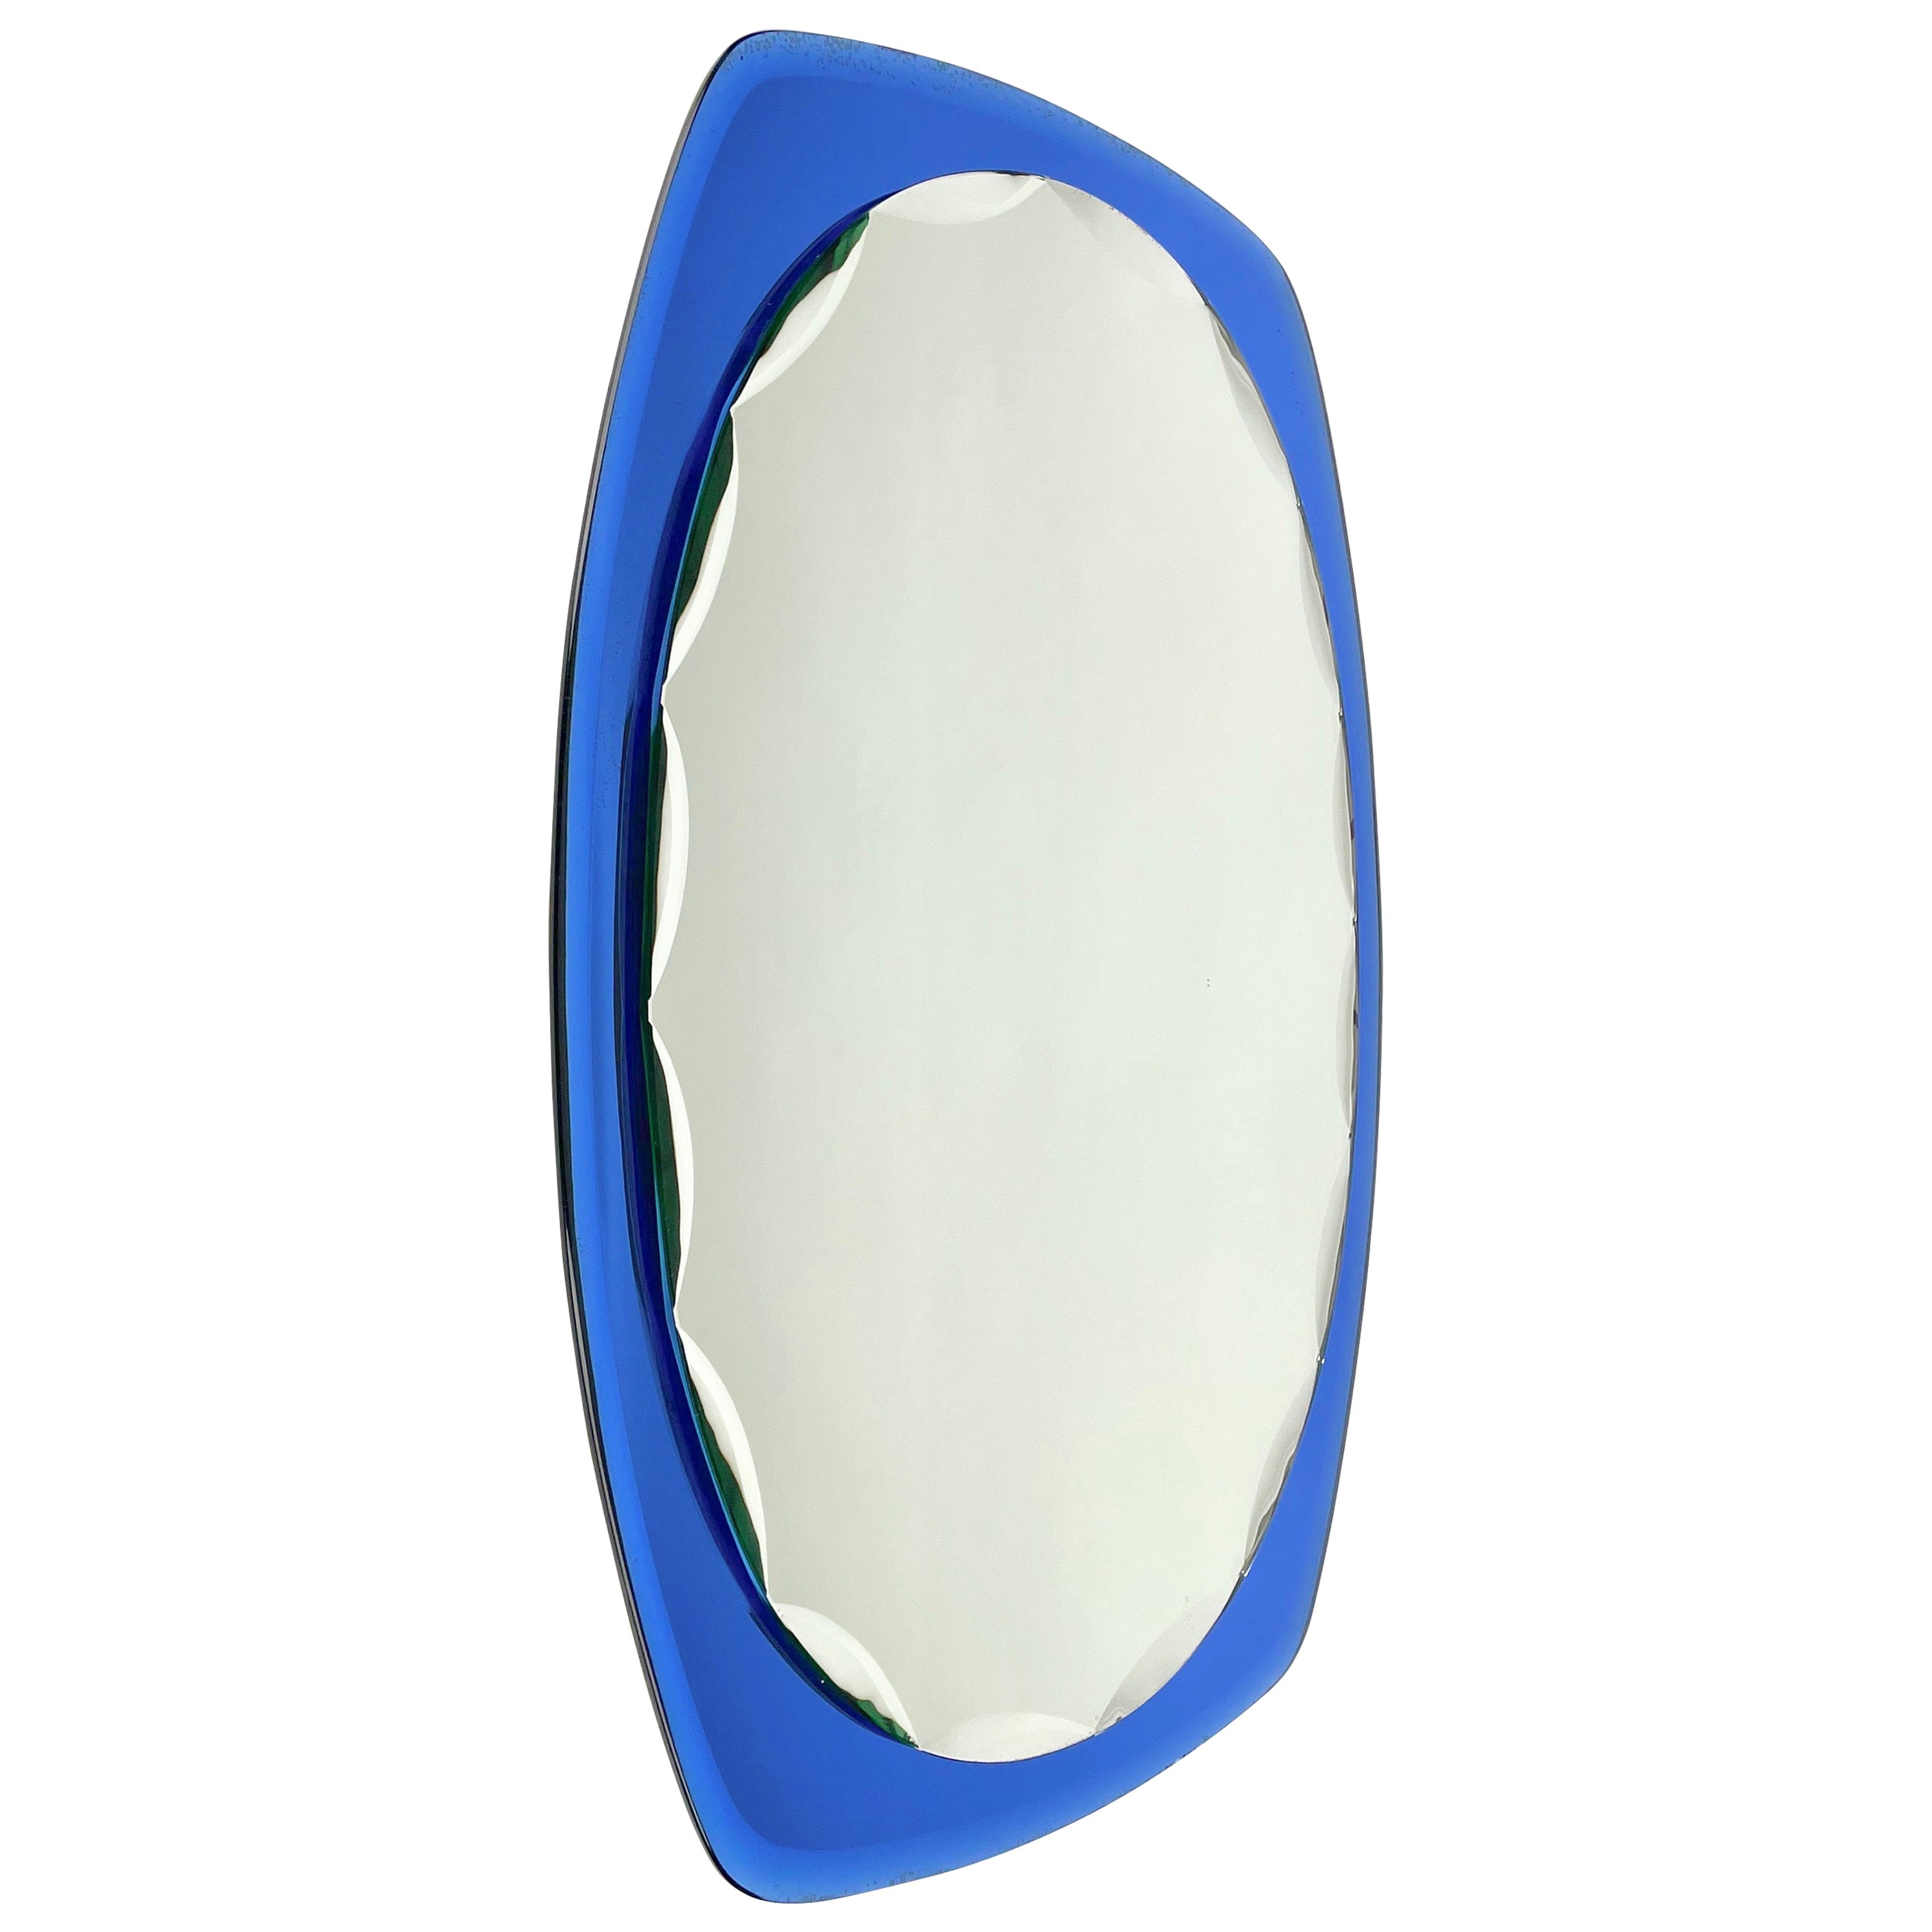 Midcentury Oval Wall Mirror Blue by Cristal Art, Italy, 1960s For Sale